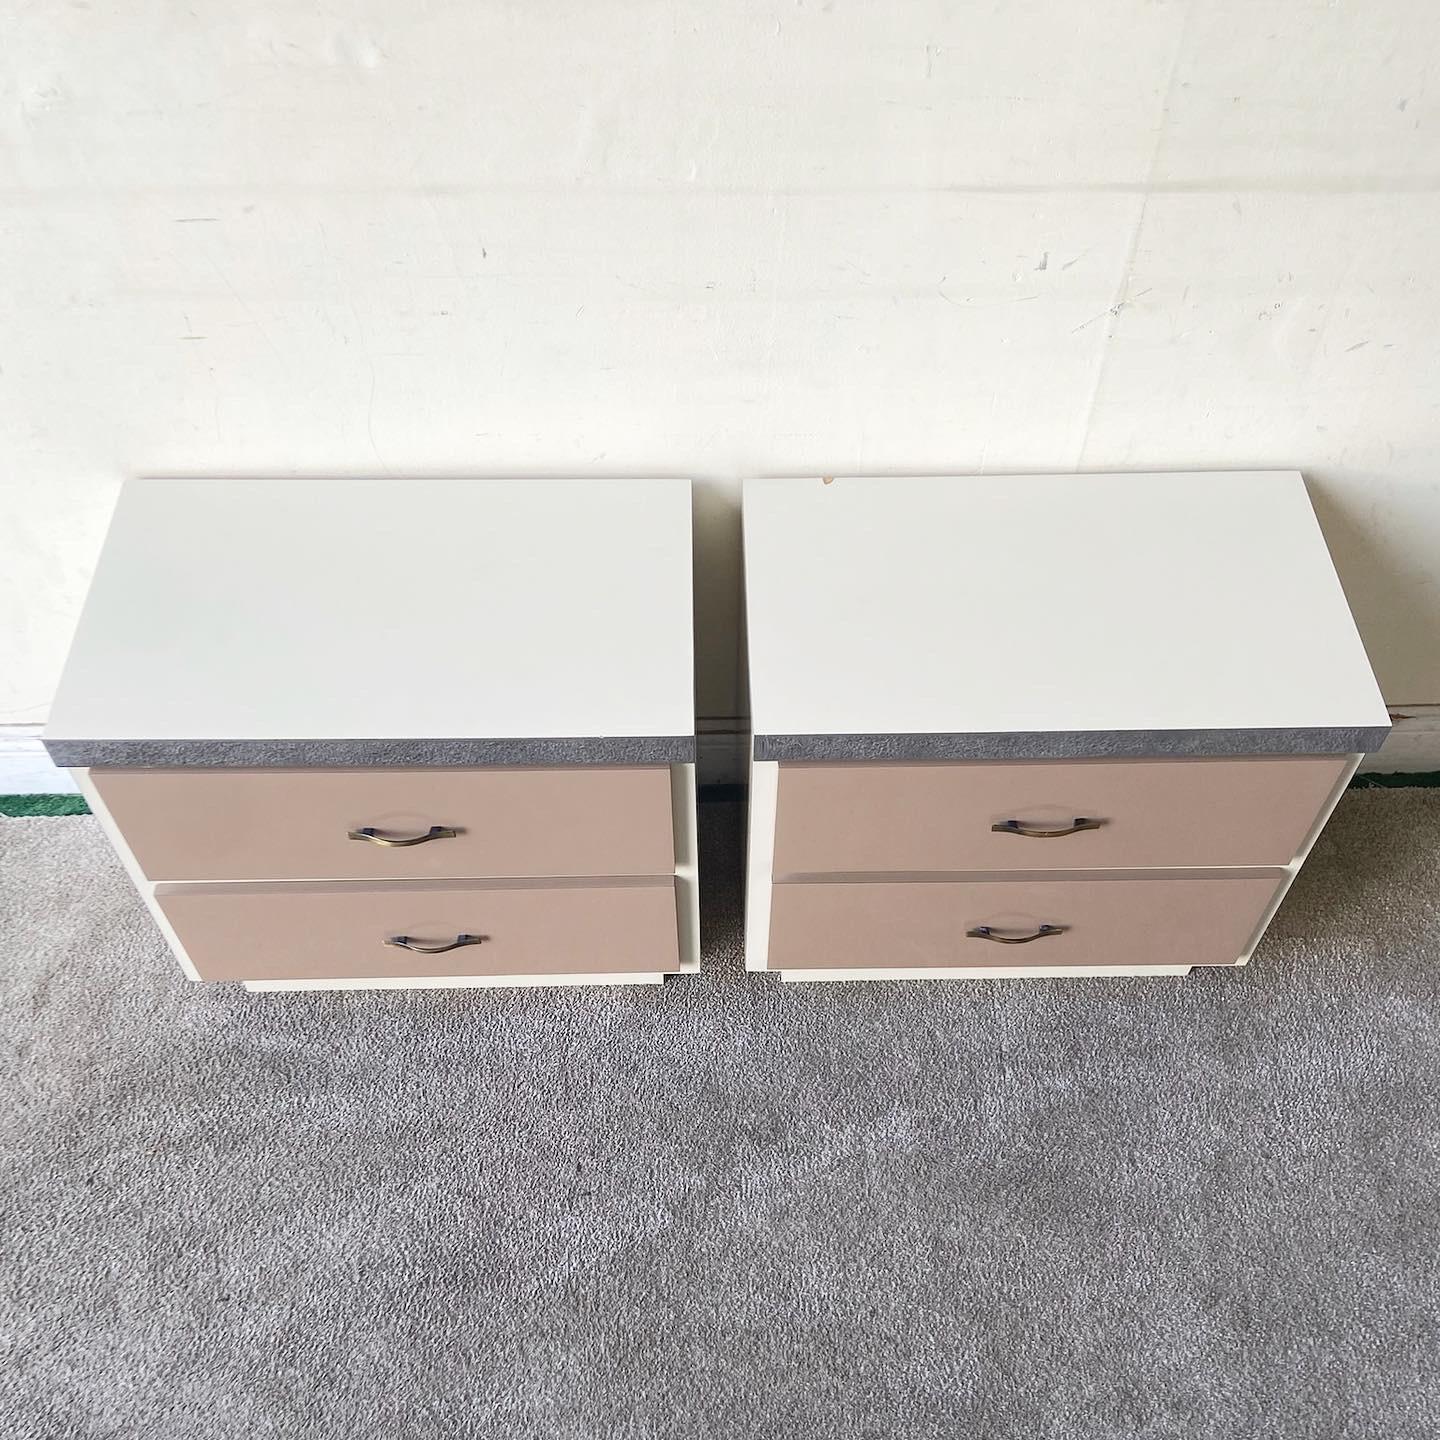 Post-Modern Postmodern Cream and Taupe Lacquer Laminate Nightstands - a Pair For Sale